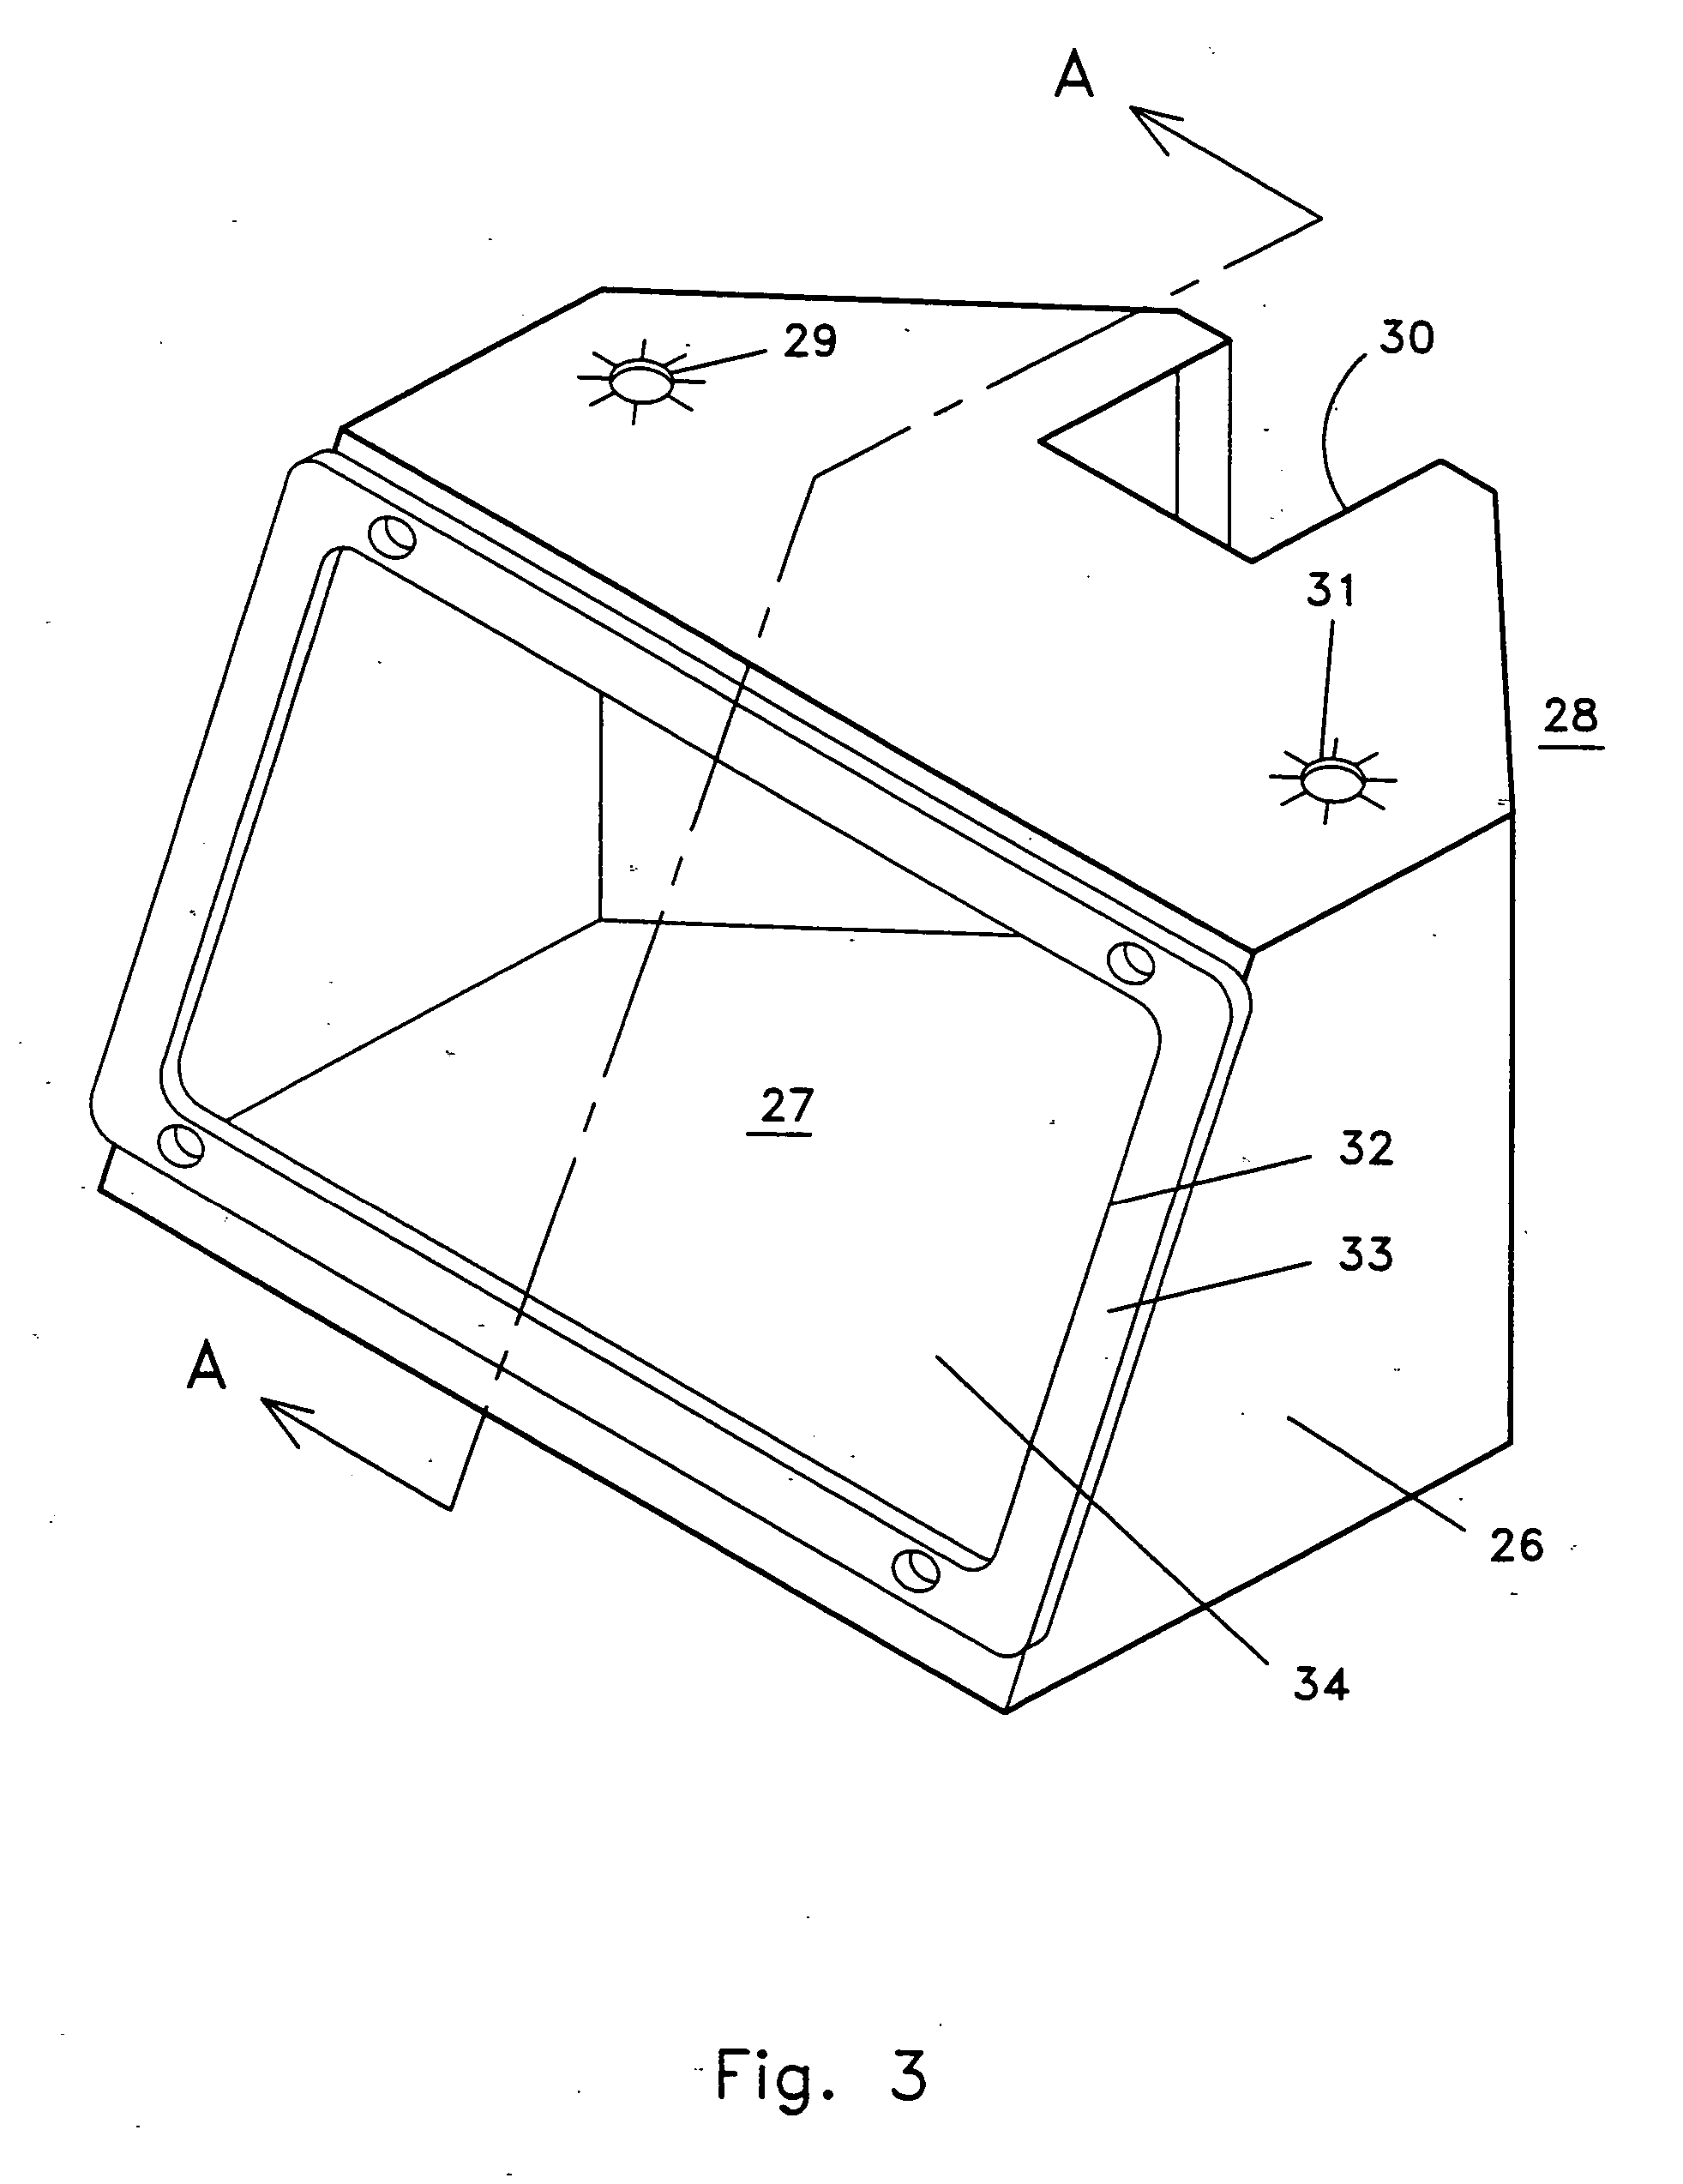 Environmental containment methods for a flow cytometer